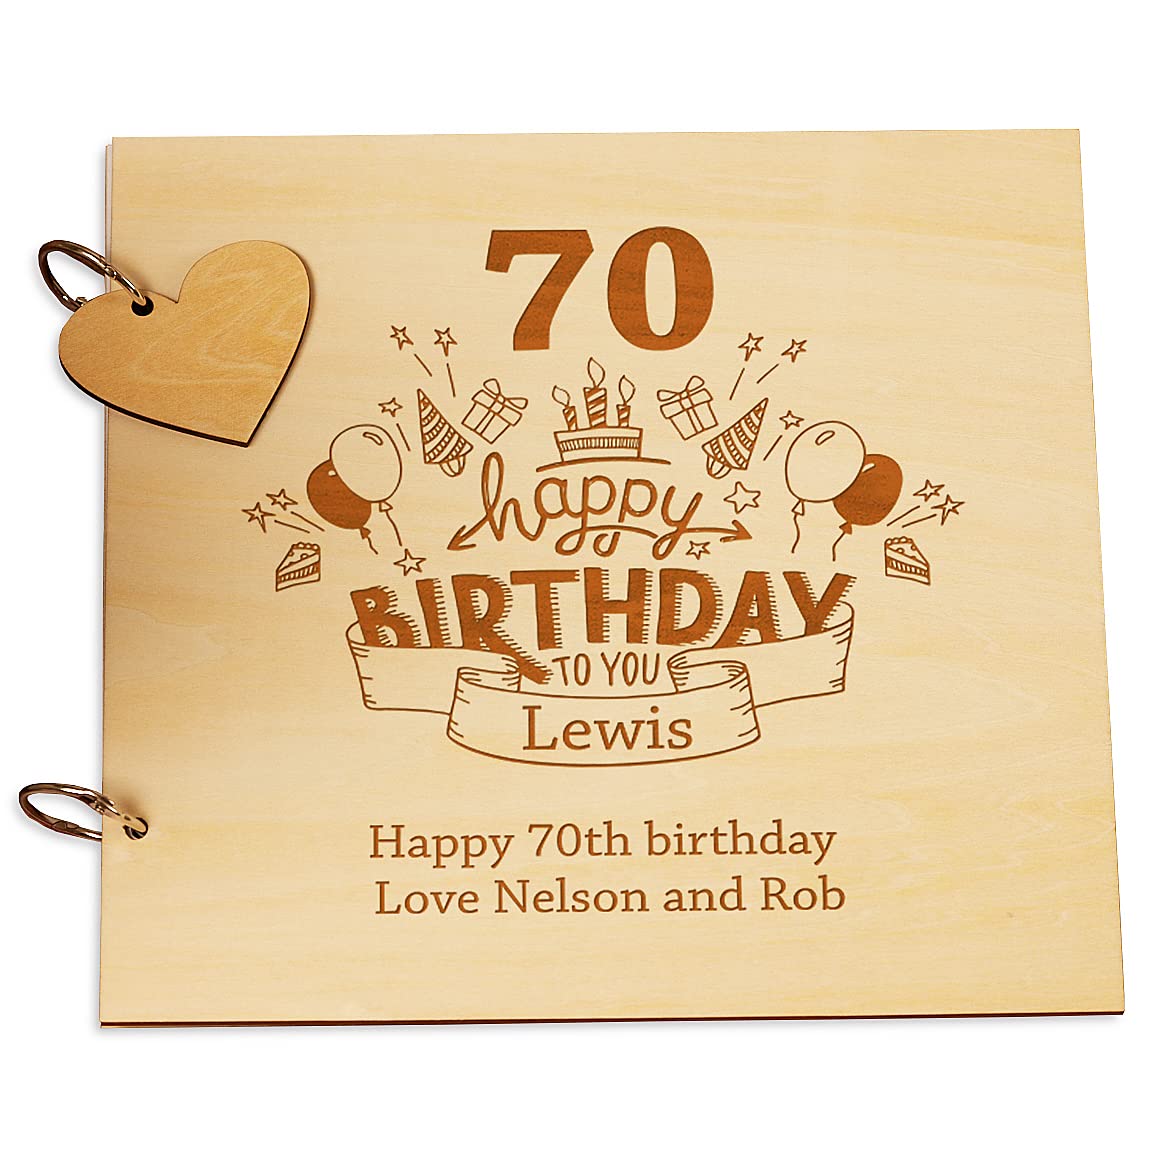 Personalised Wooden 70th Birthday Scrapbook Guest Book or Photo Album